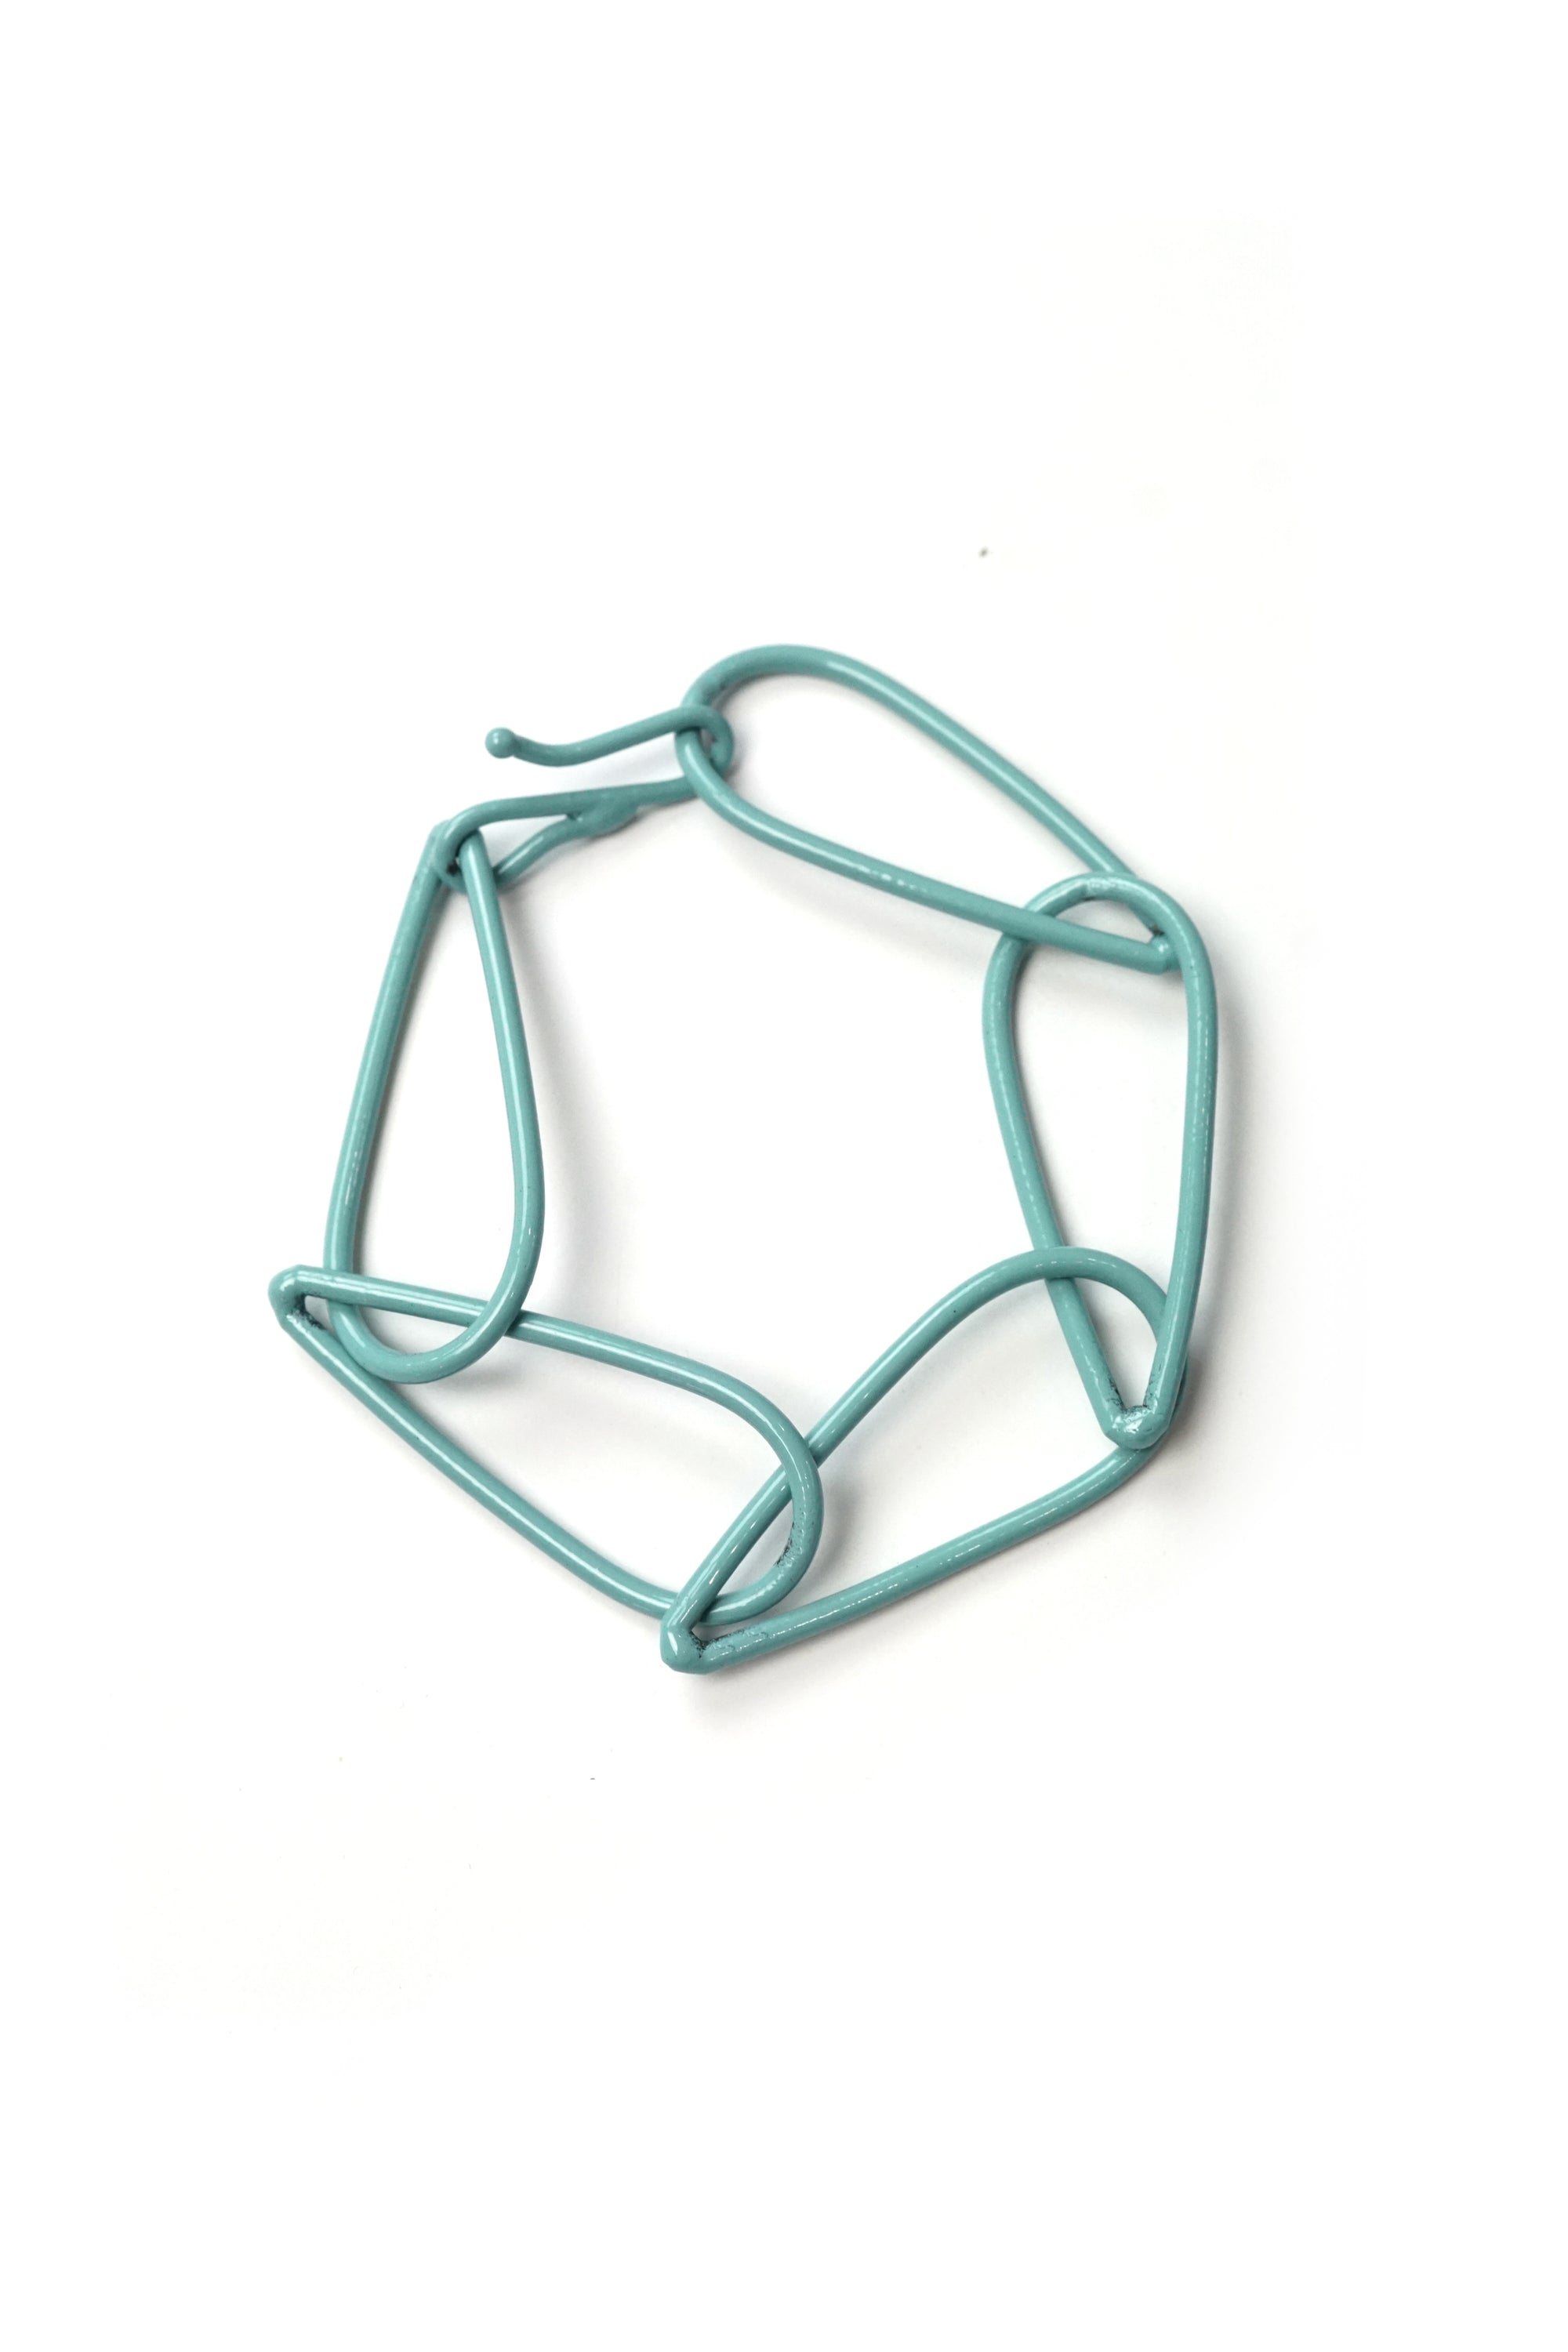 Modular Bracelet in Faded Teal - small